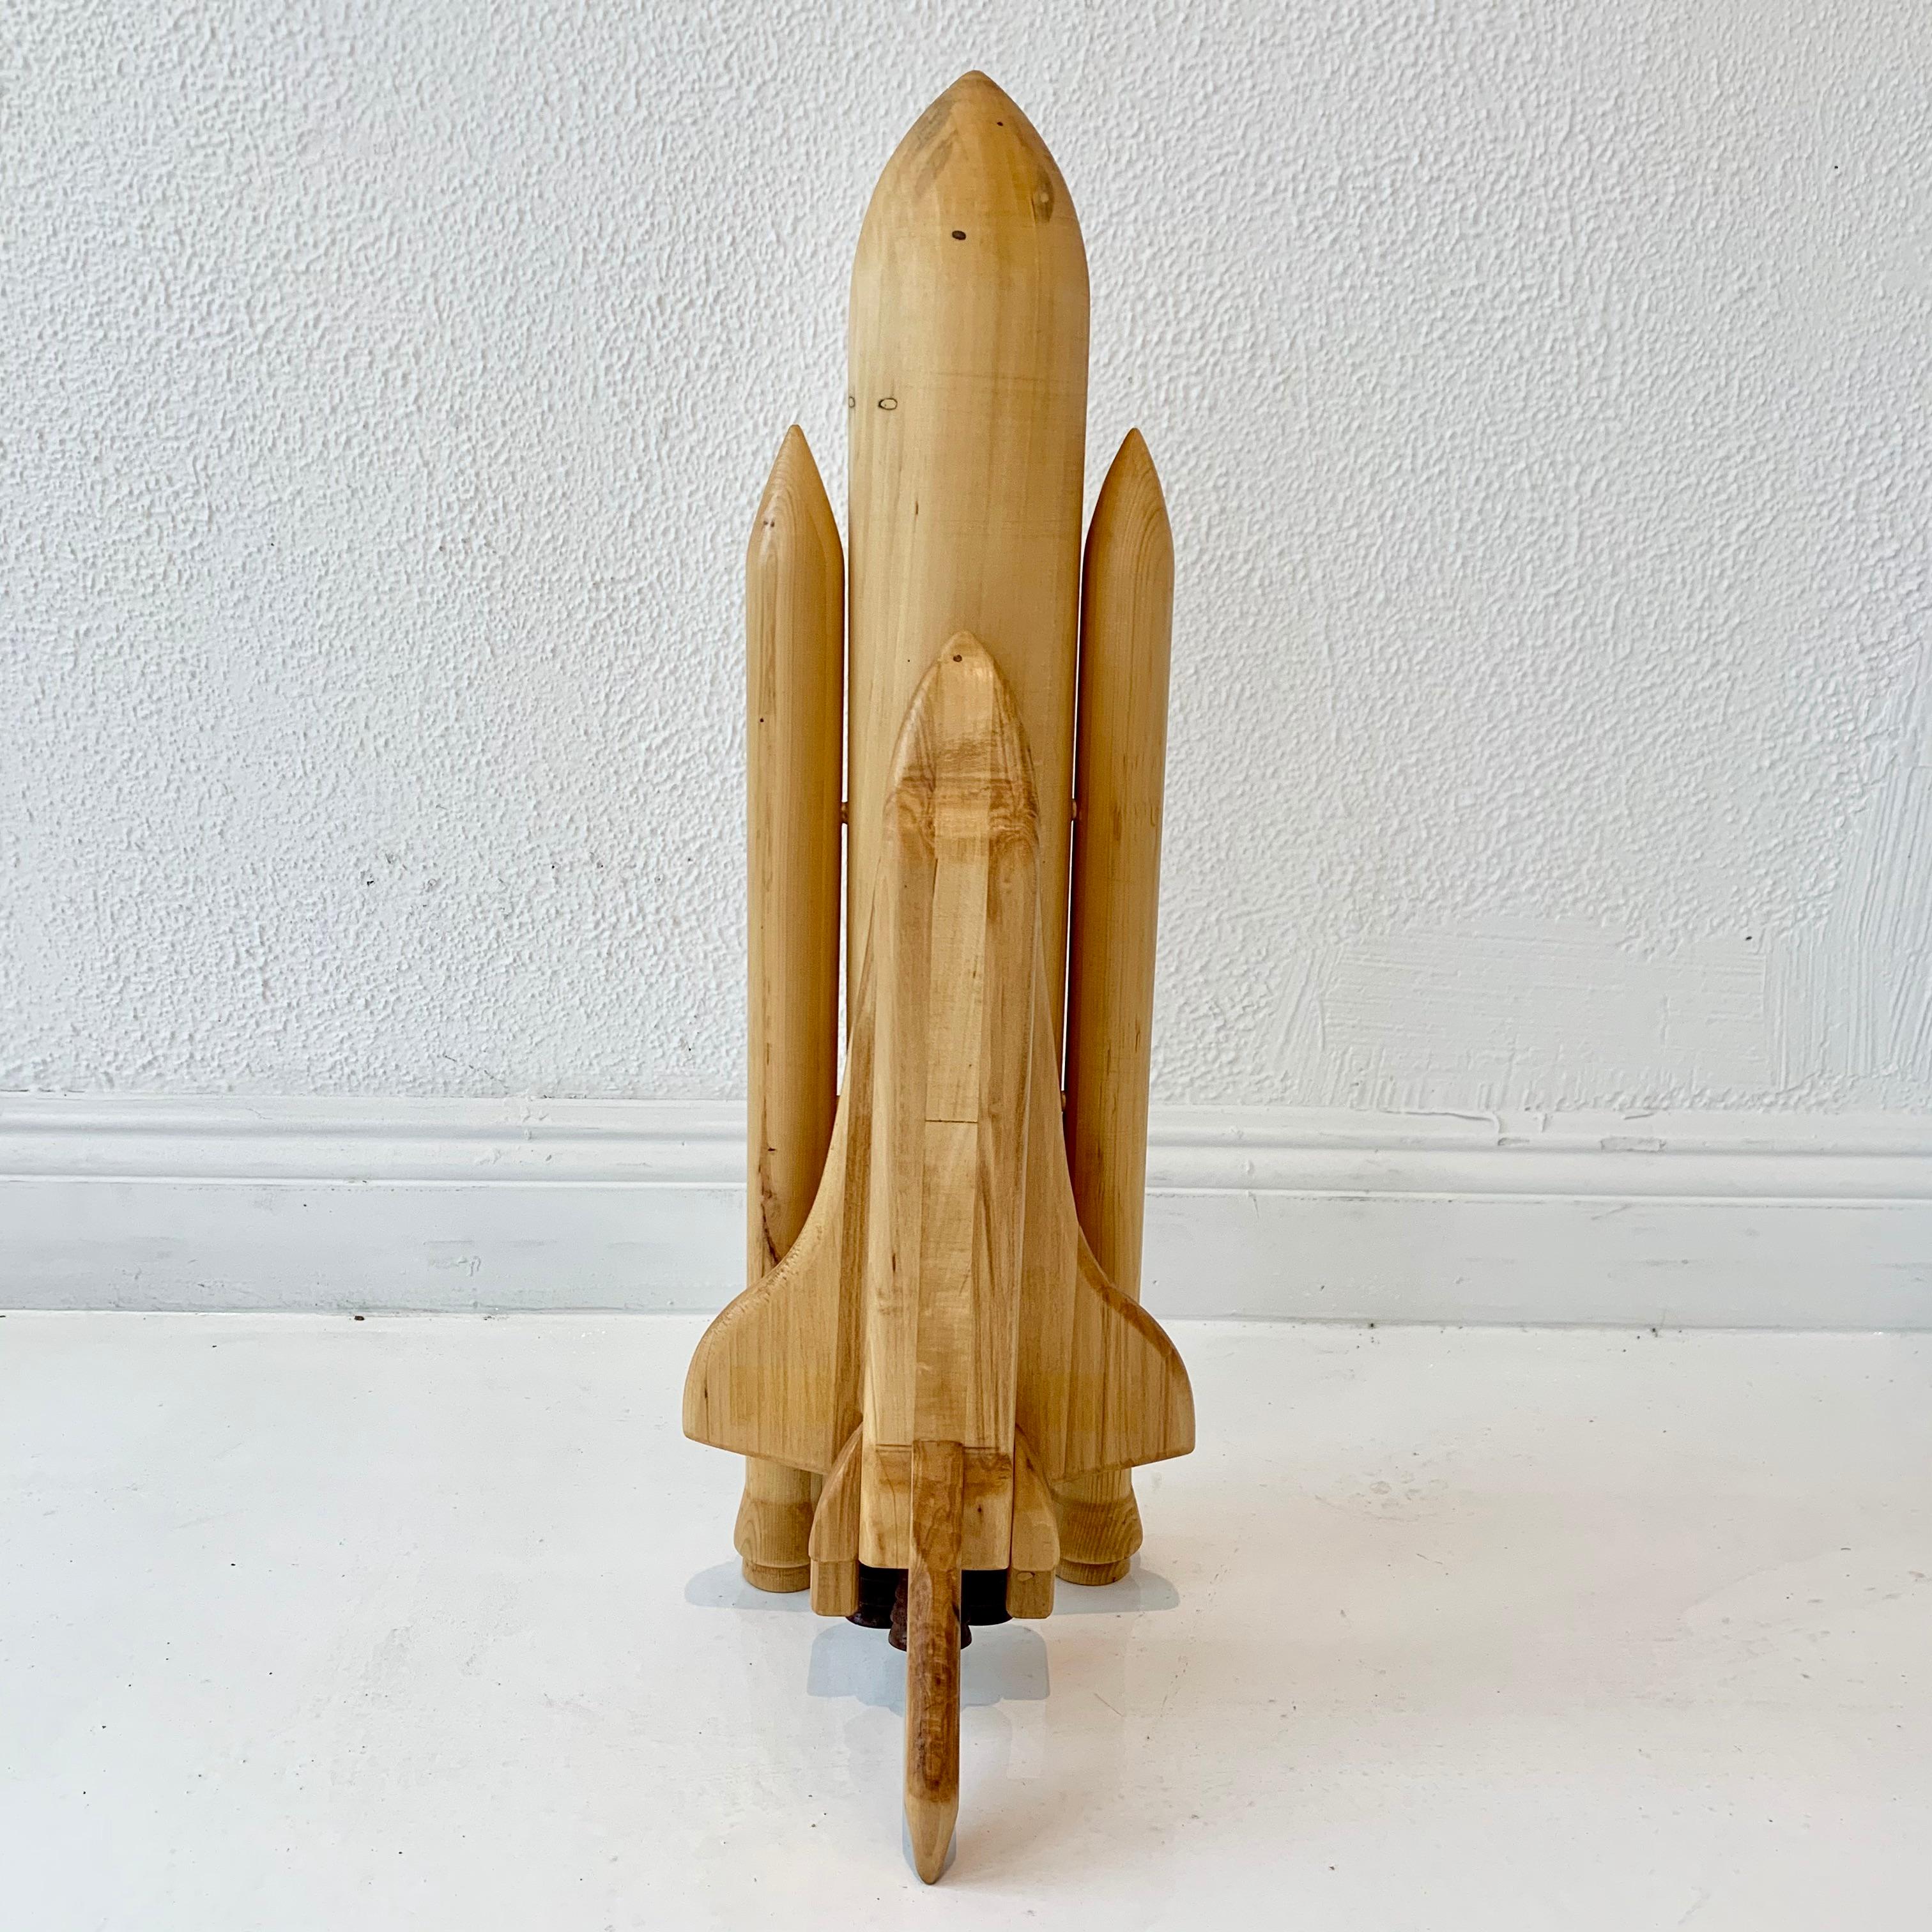 Folk Art space shuttle, hand carved in wood. 4 pieces that fit together. Main fuel tank, two rocket boosters and the orbiter/shuttle. Cool sculpture. Great condition. 

 